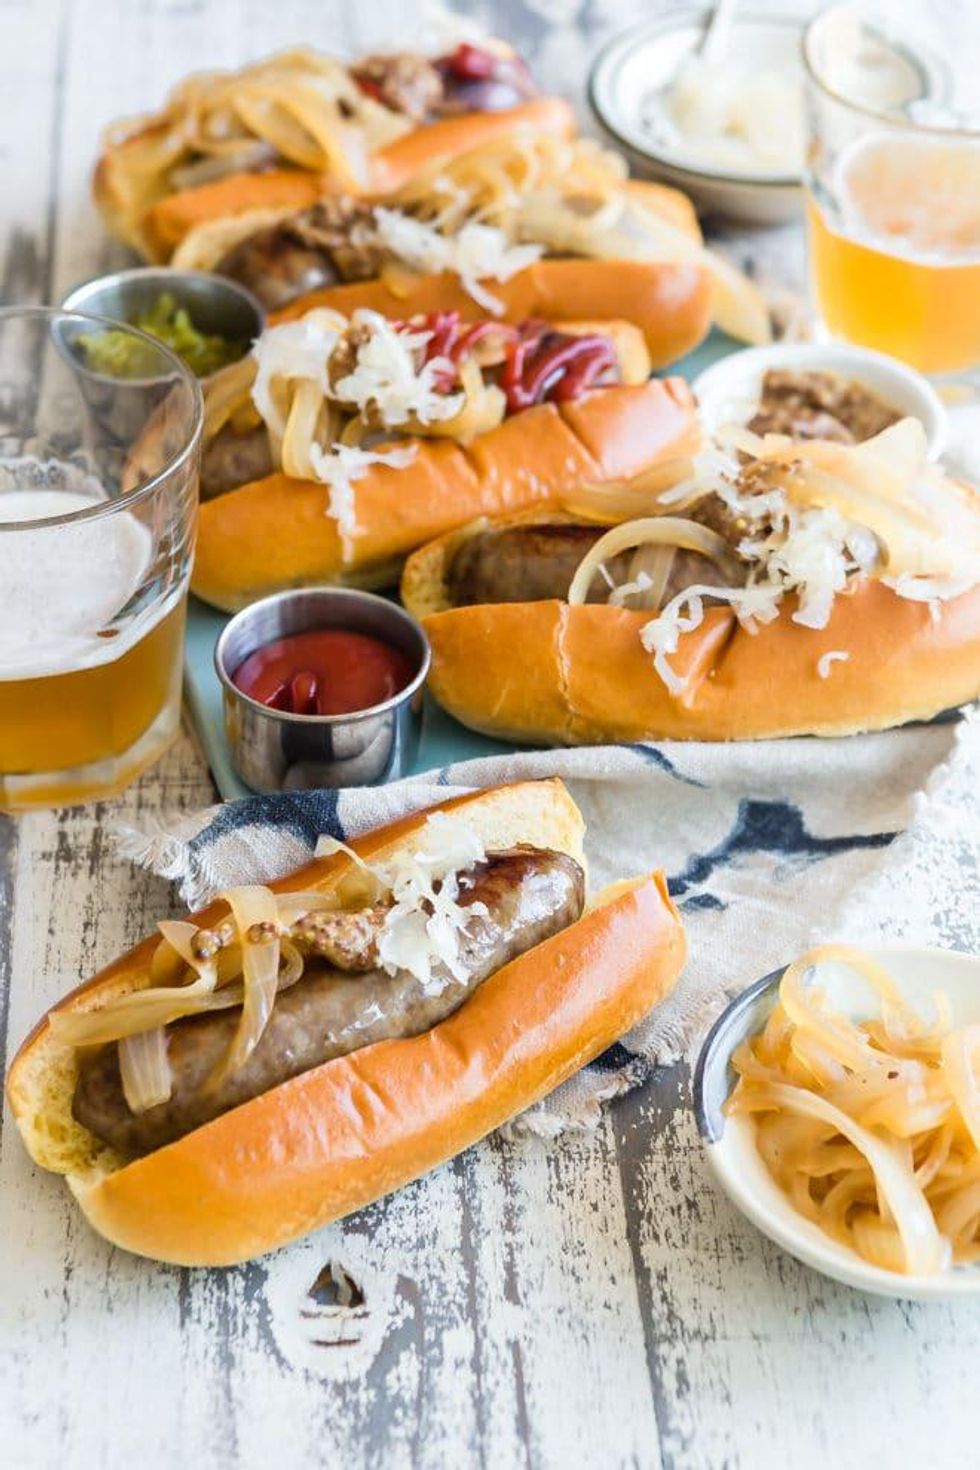 Make These Wisconsin Beer Brats for Your Next Tailgate Party - Brit + Co